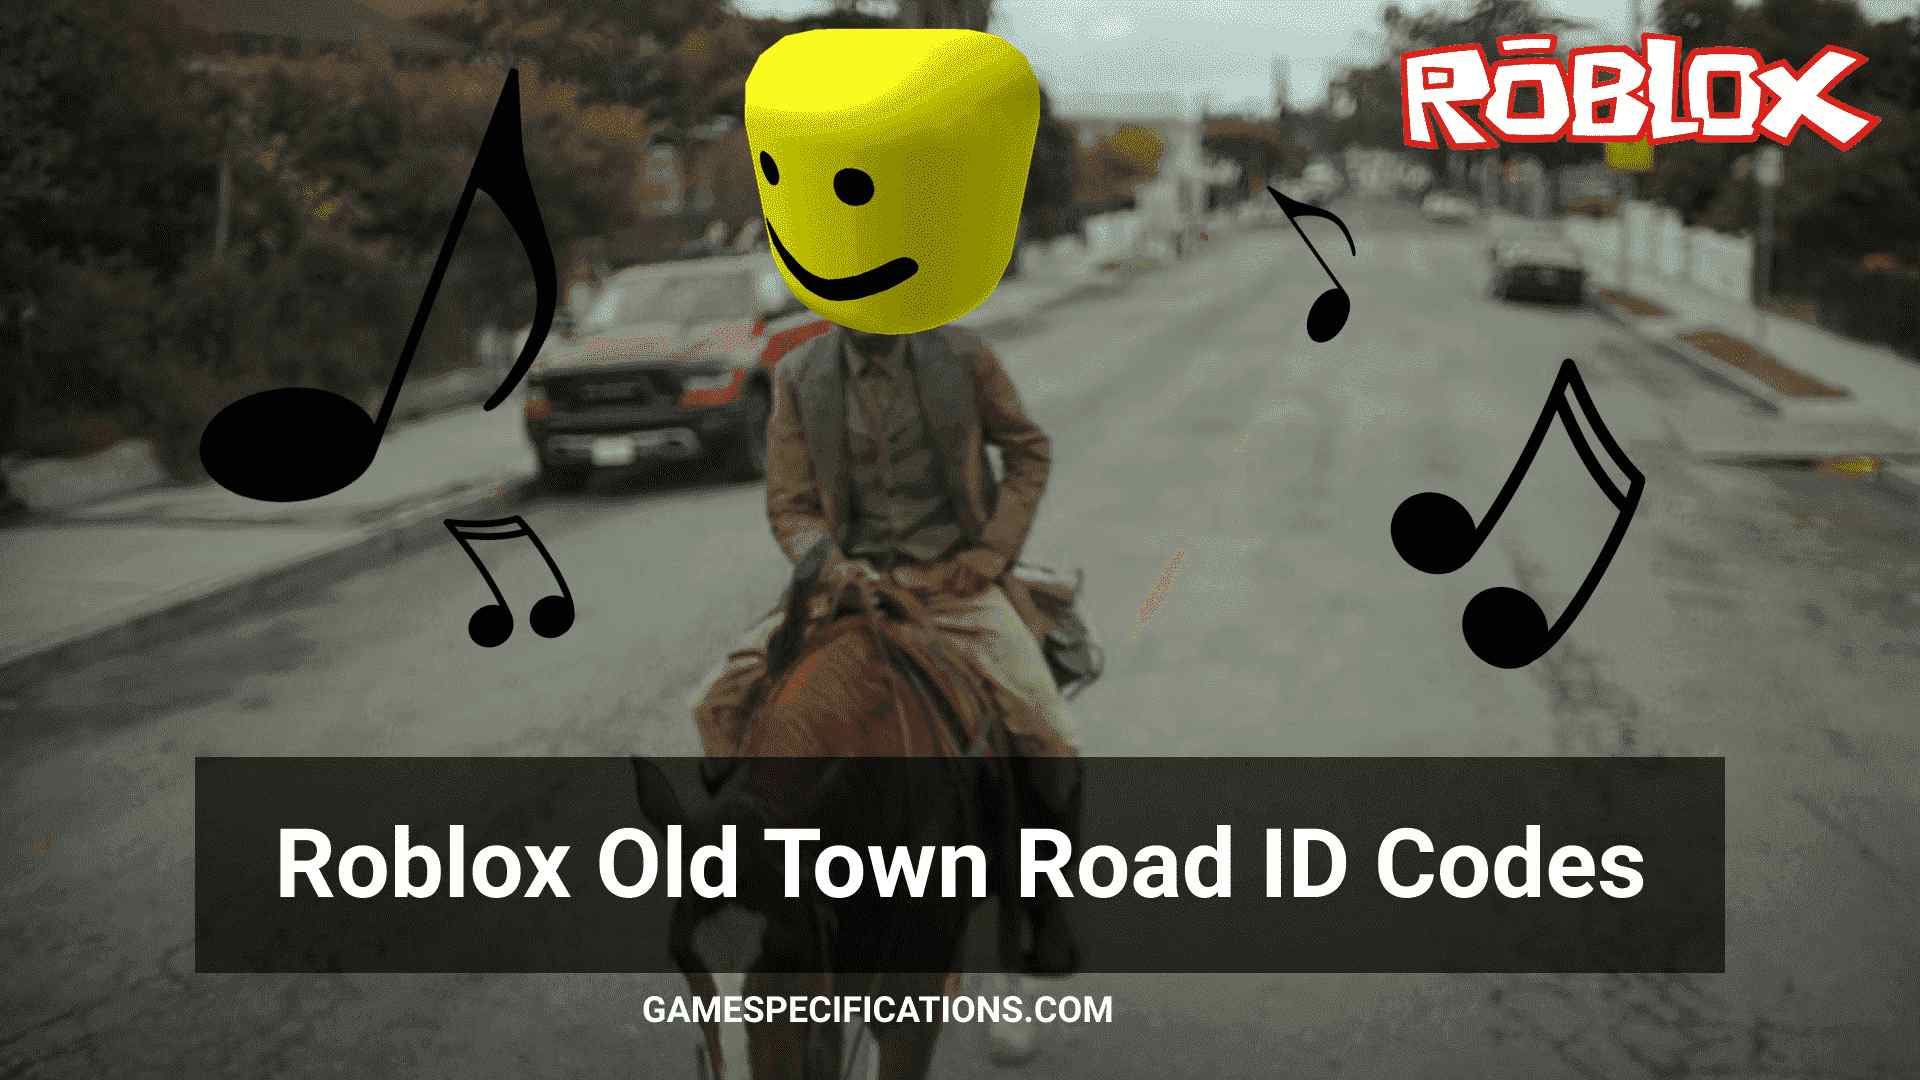 Ohtbreqjb6zwm - id codes roblox songs old town road